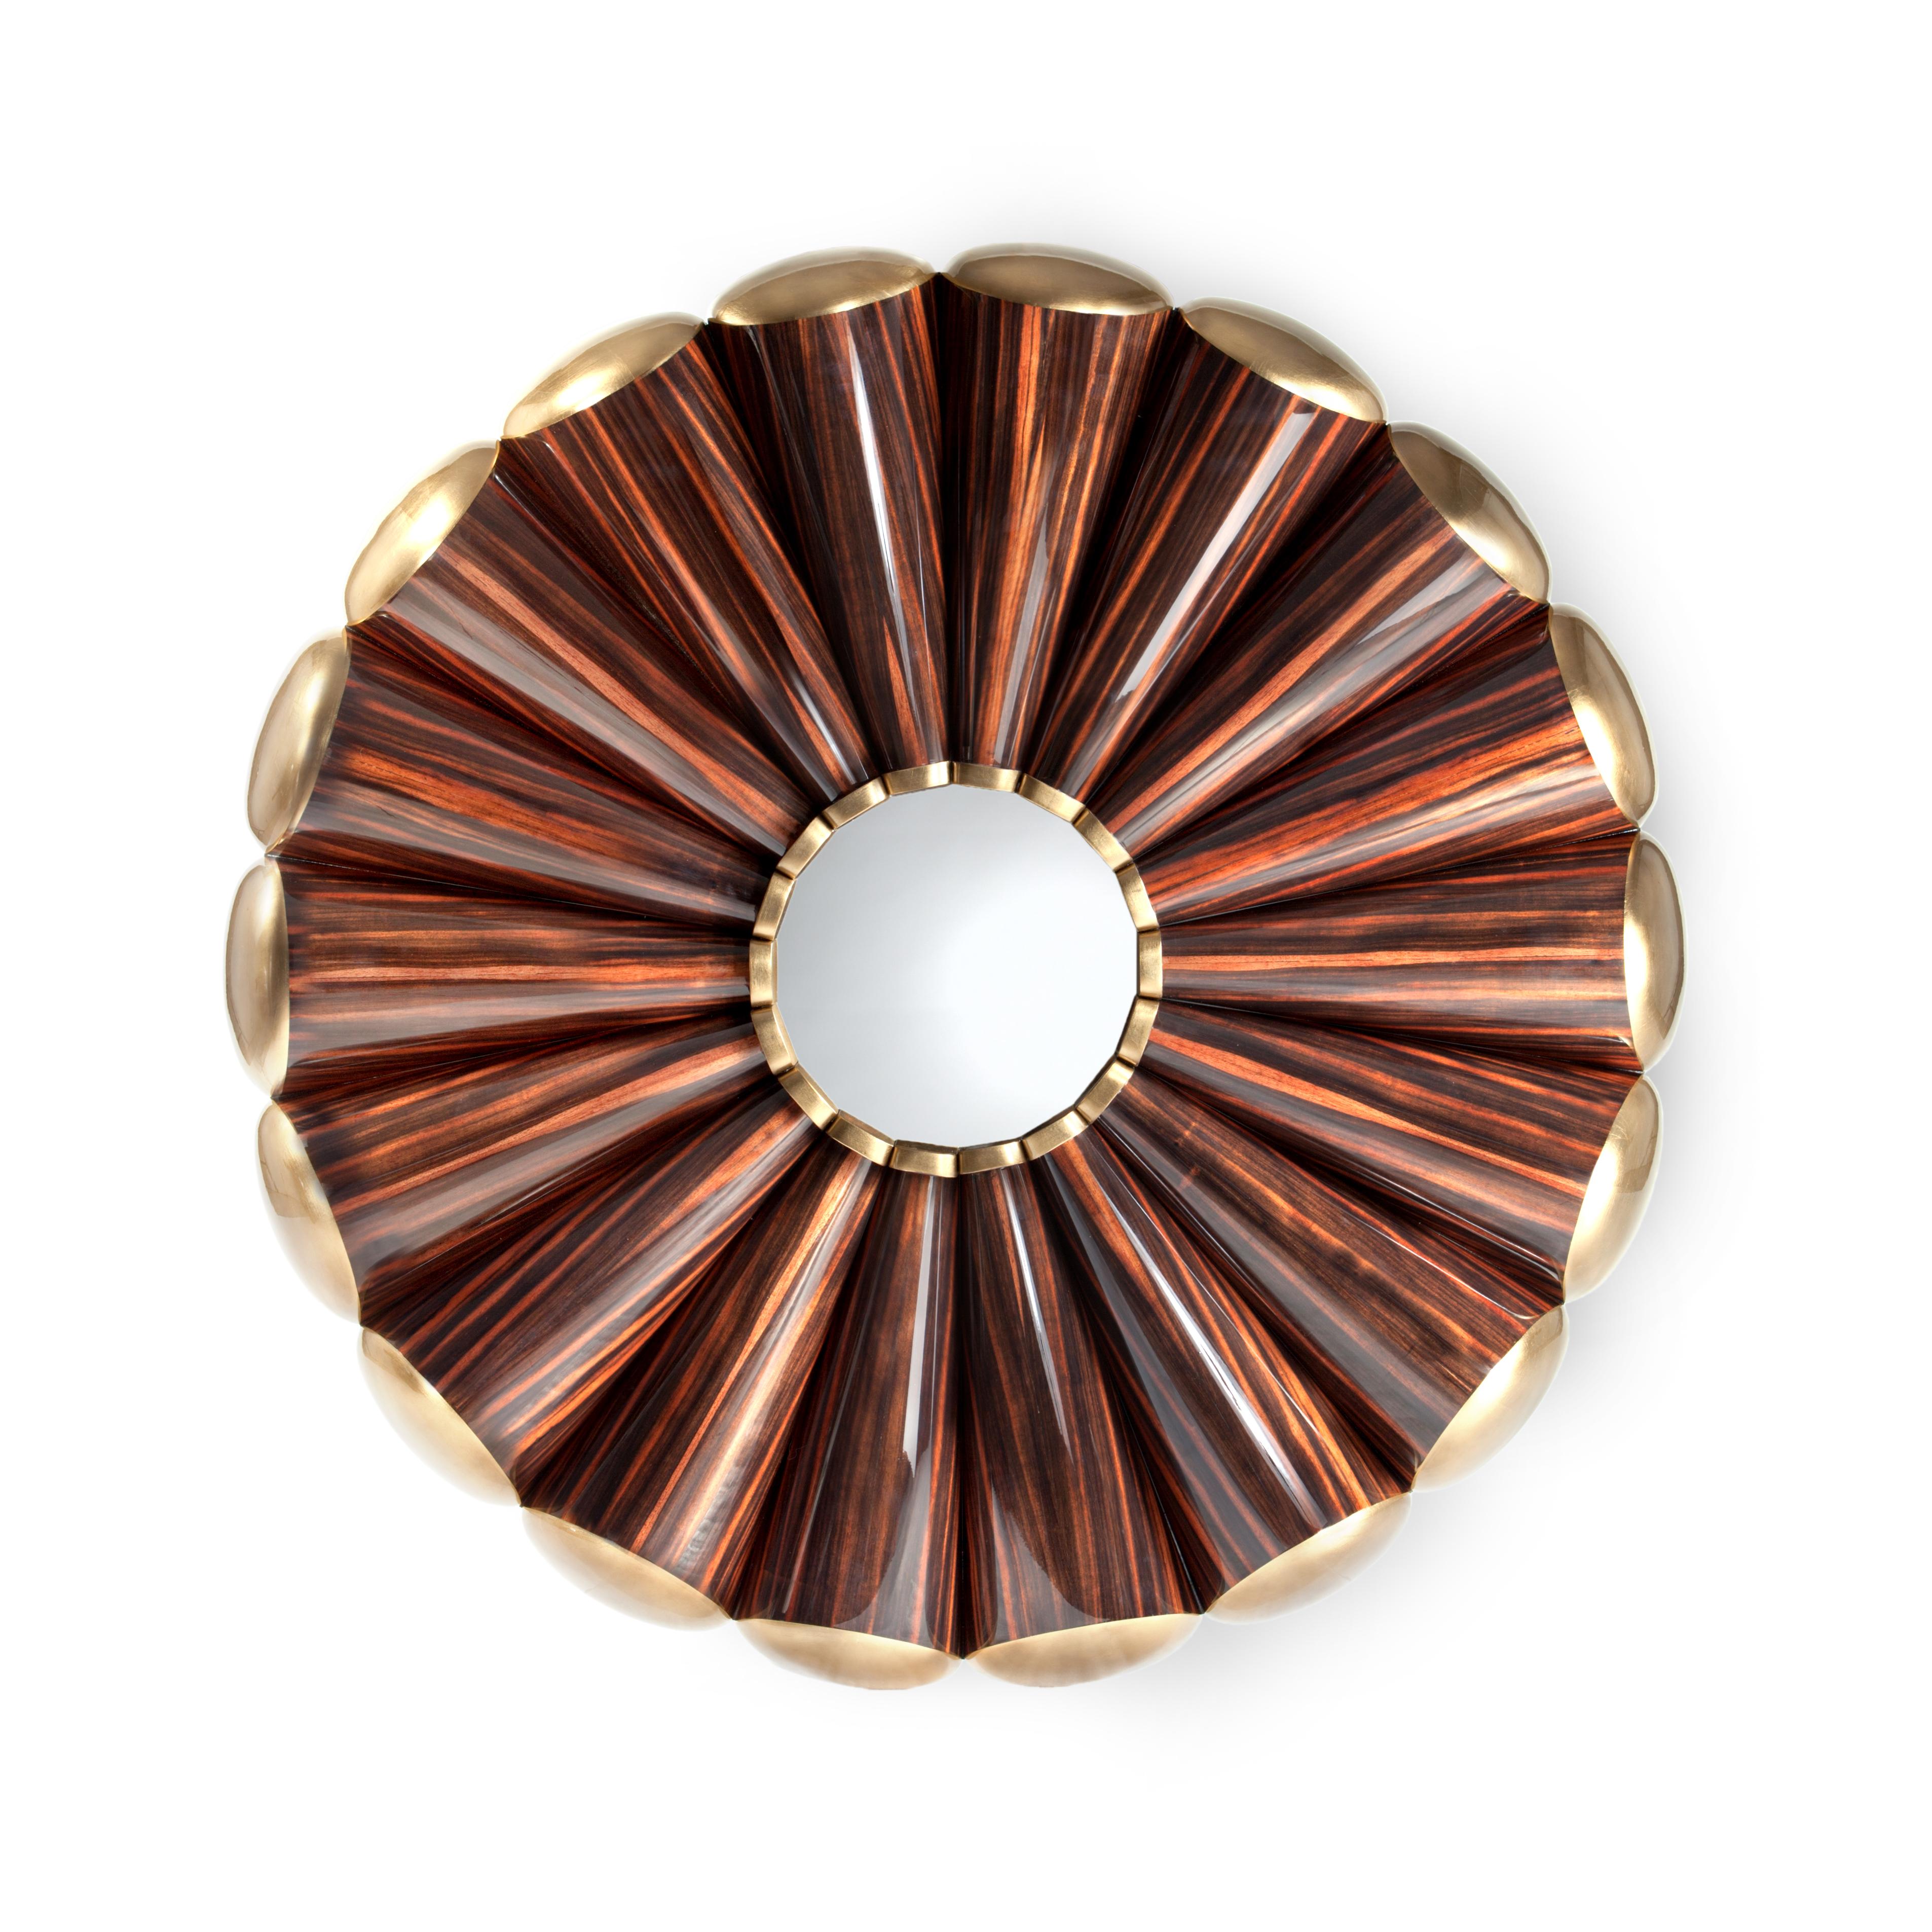 The Osani circle is a game played by Efé children of the Ituri tropical forest in the Republic of Congo. The round mirror represents the spirit of mutual help present in this tribe.
The ebony wood captures the effect of the childrens’ outstretched